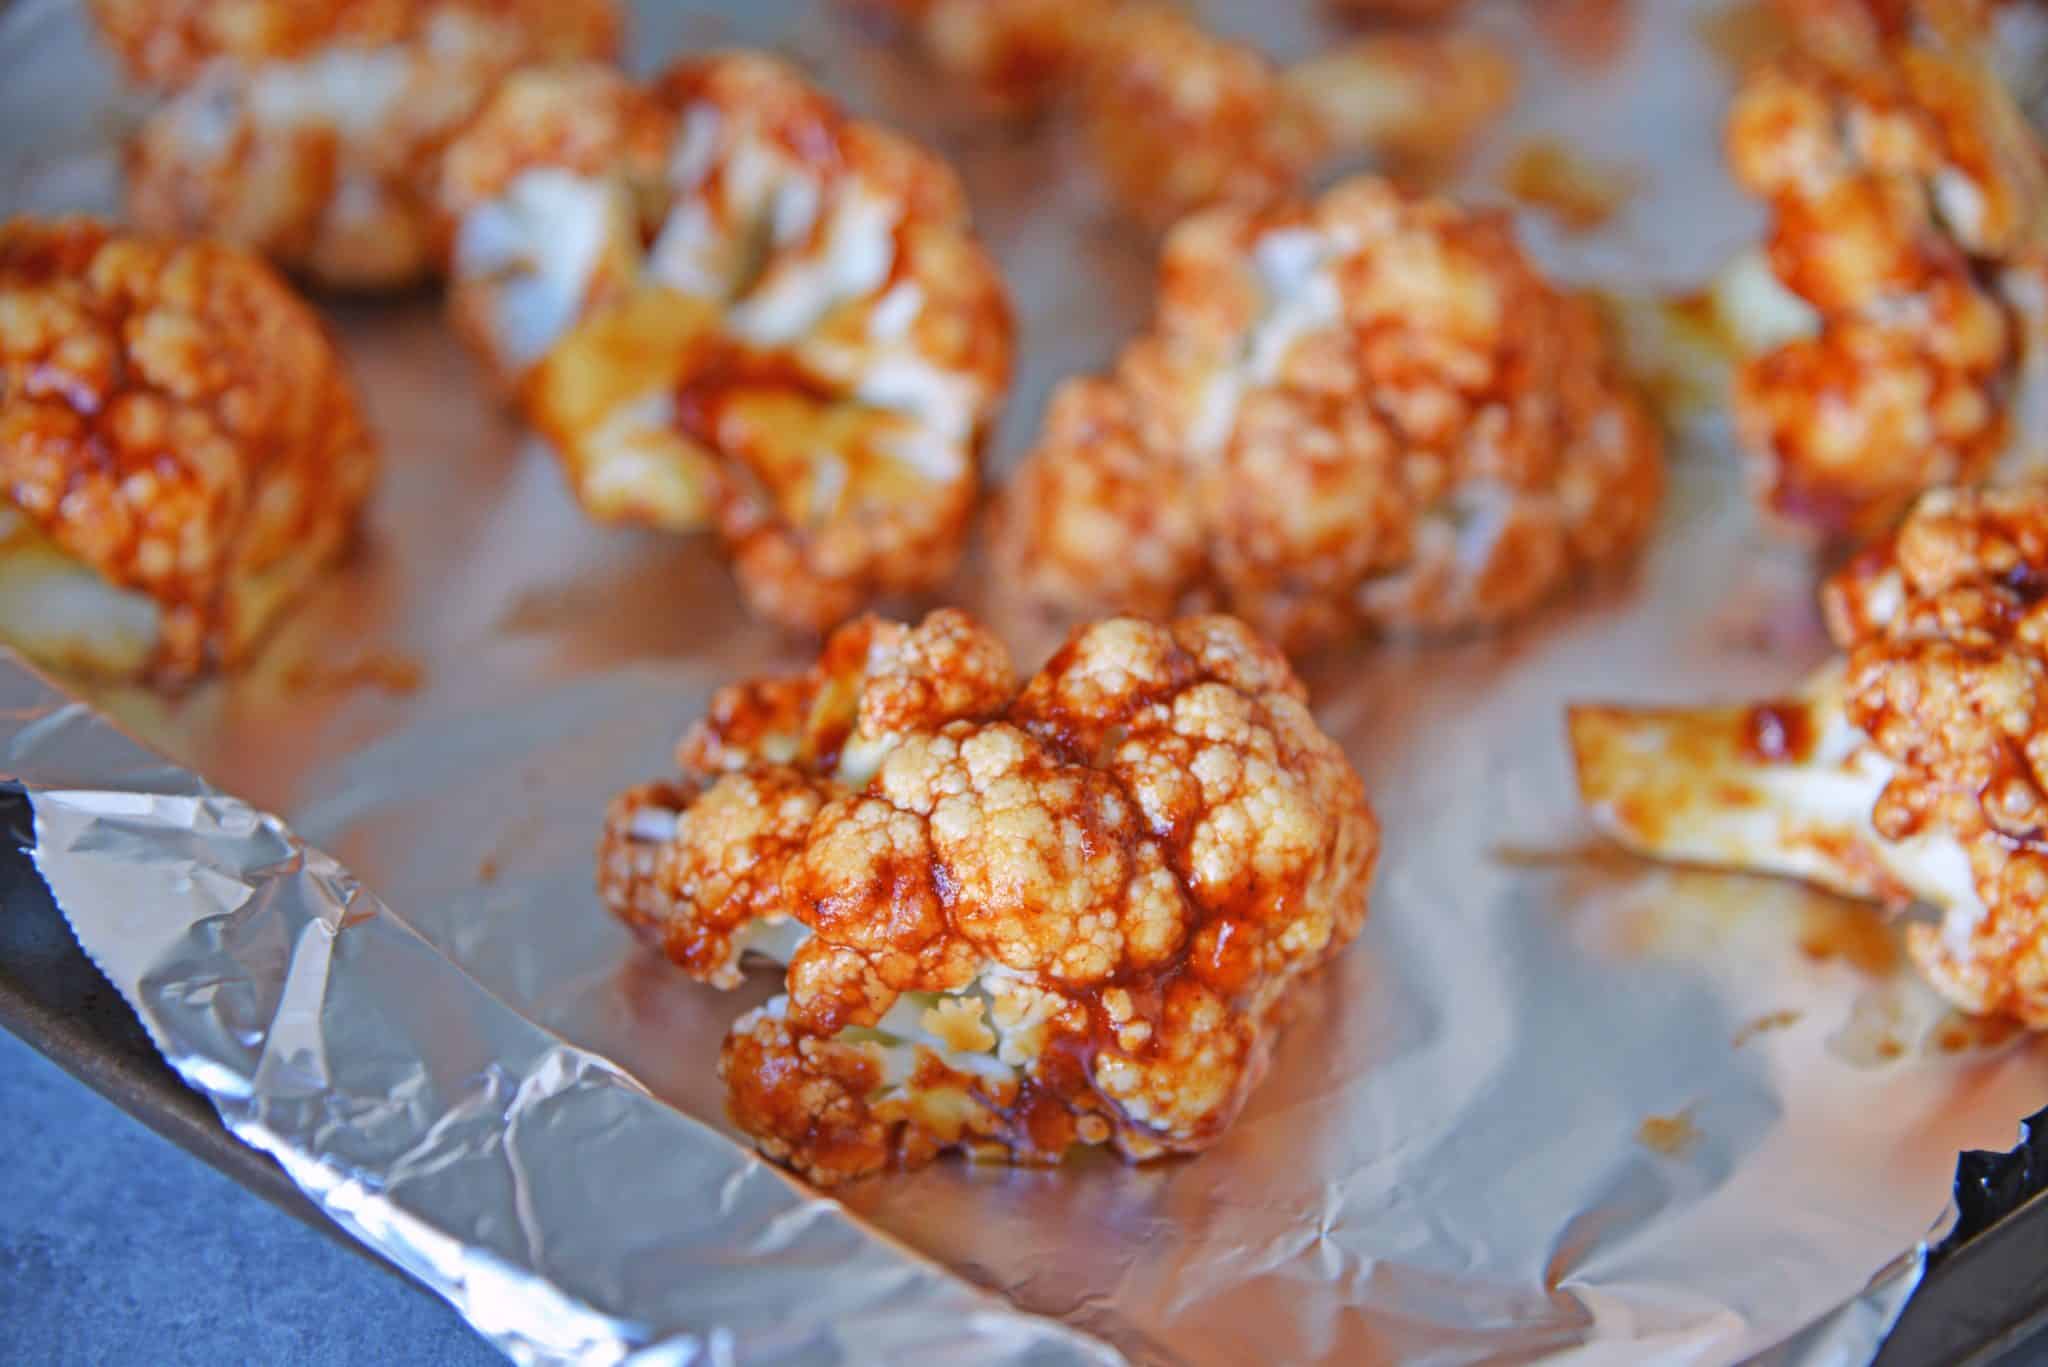 BBQ Cauliflower Bites make a healthy and quick appetizer or side. Make them zesty, tangy or even sweet! #cauliflowerrecipes #bbqcauliflowerbites www.savoryexperiments.com 